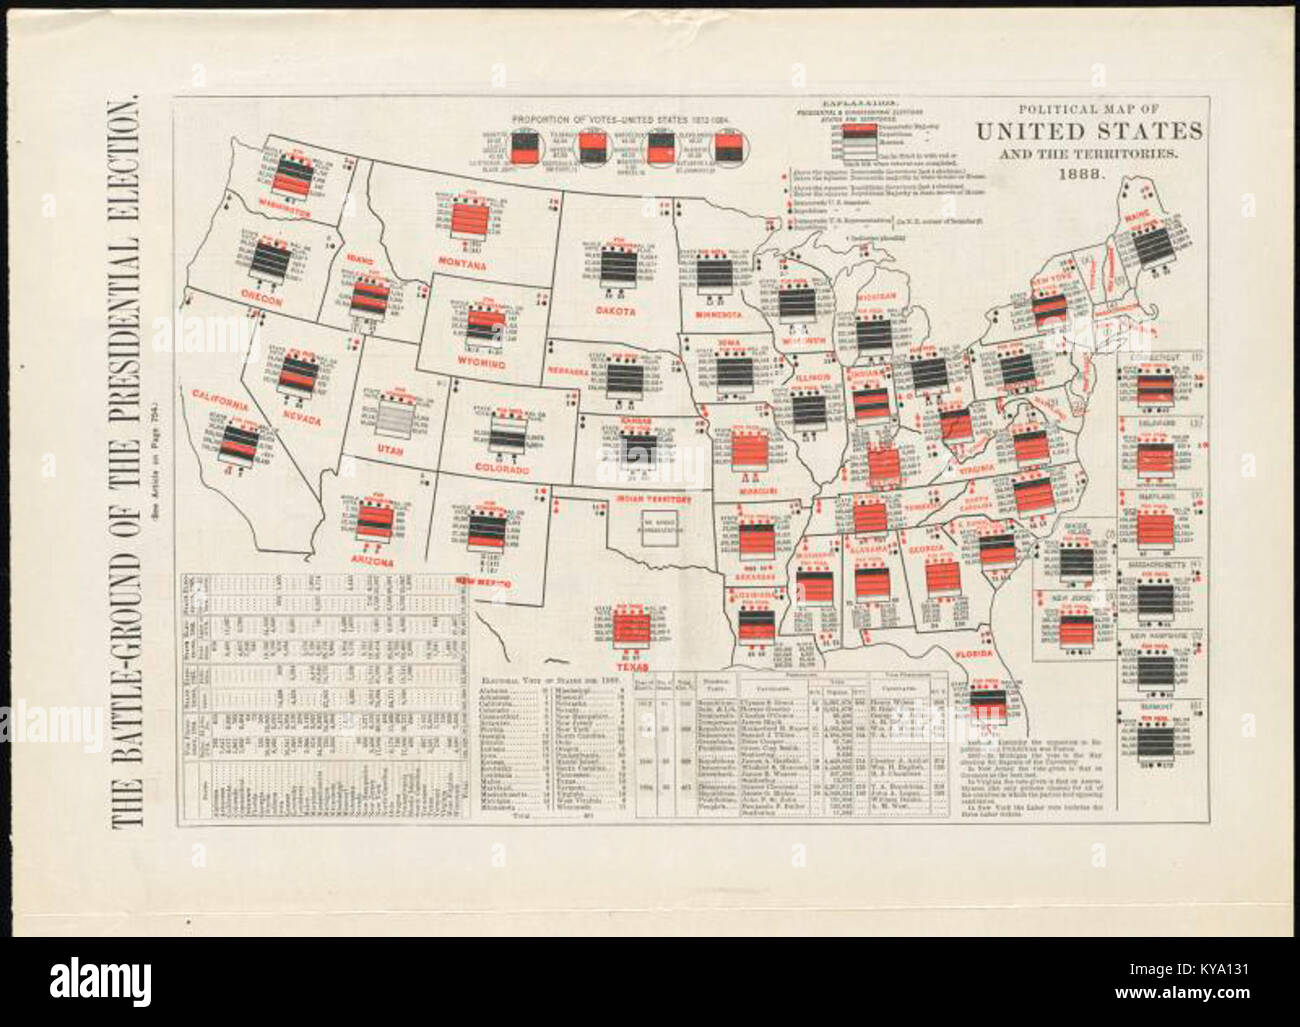 Political map of the United States and territories. 1888 (10294211894) Stock Photo